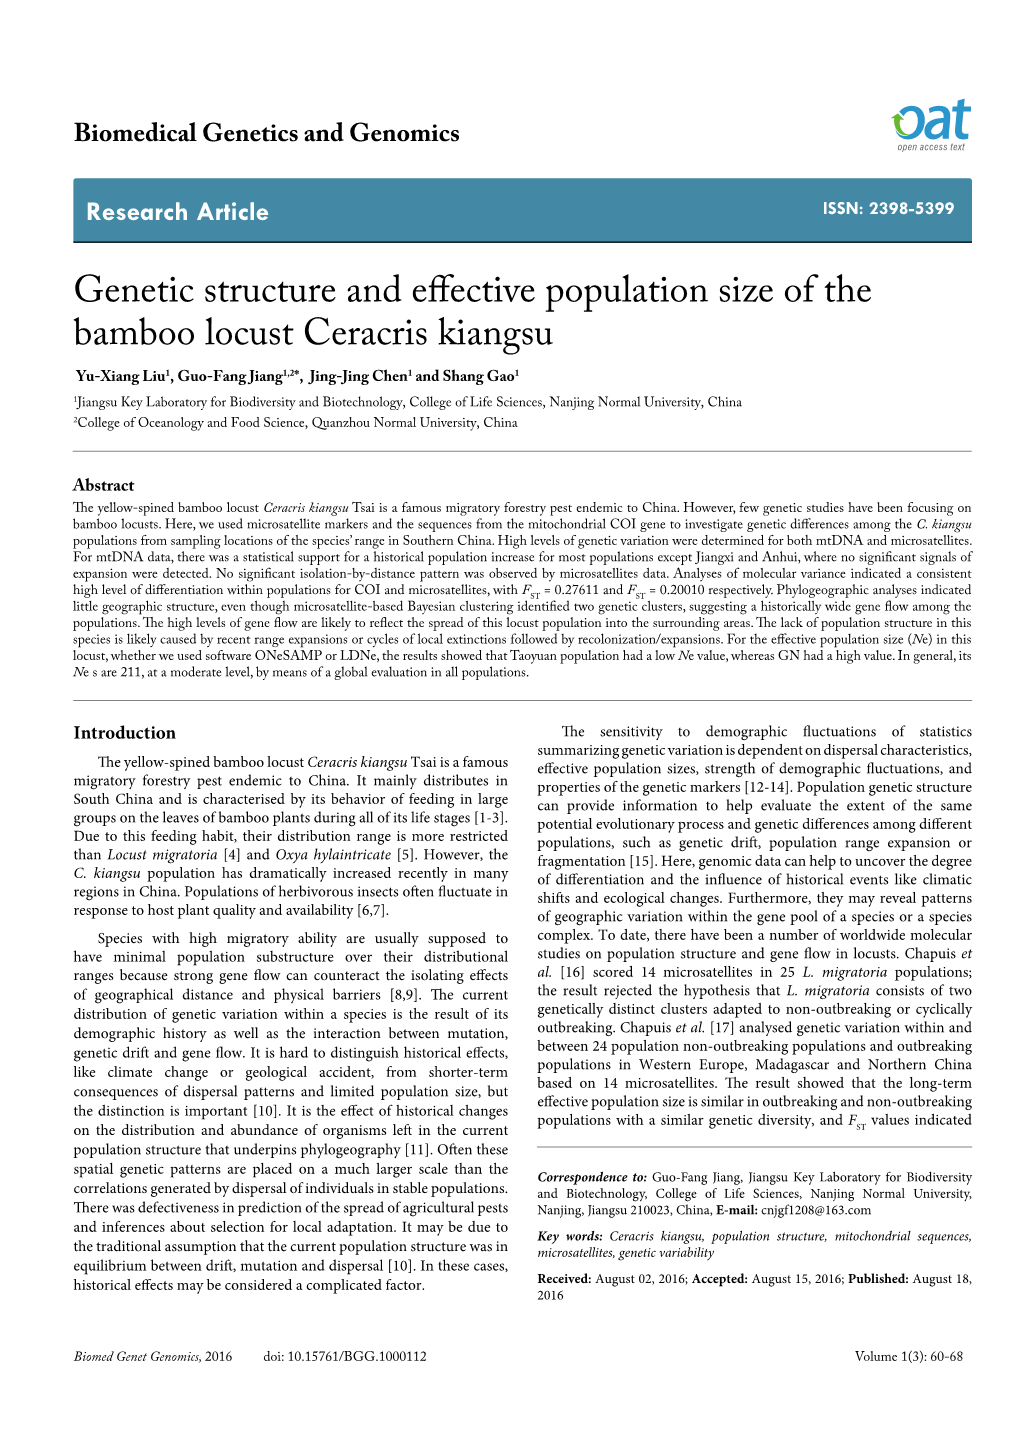 Genetic Structure and Effective Population Size of the Bamboo